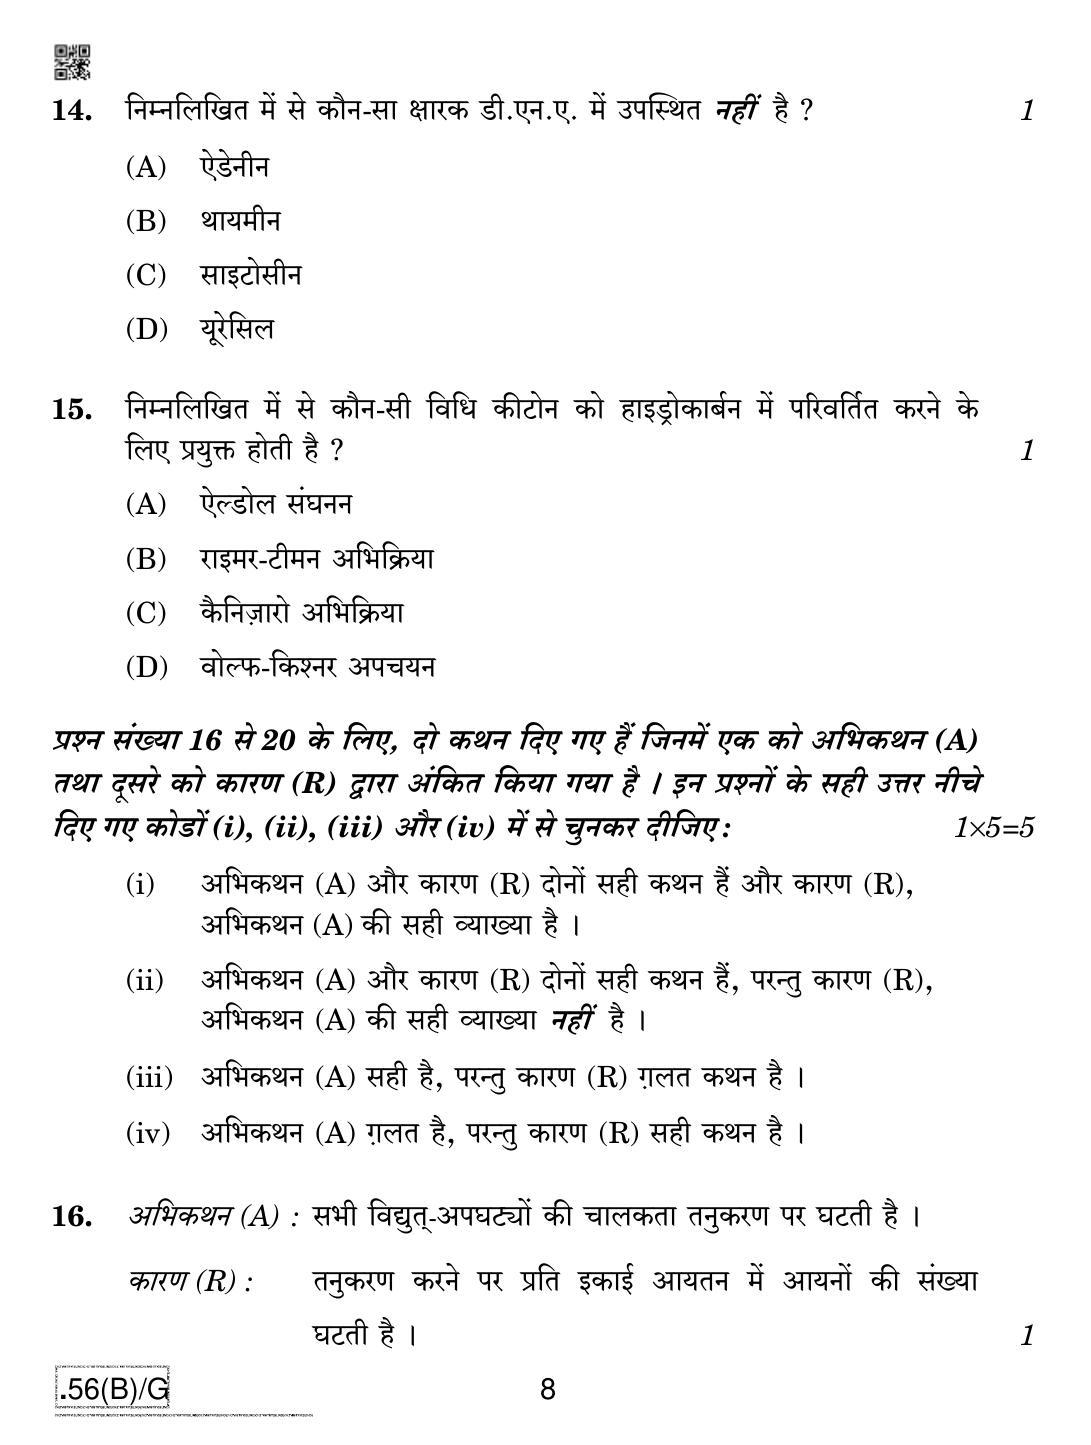 CBSE Class 12 56(B)-C - Chemistry For Blind Candidates 2020 Compartment Question Paper - Page 8